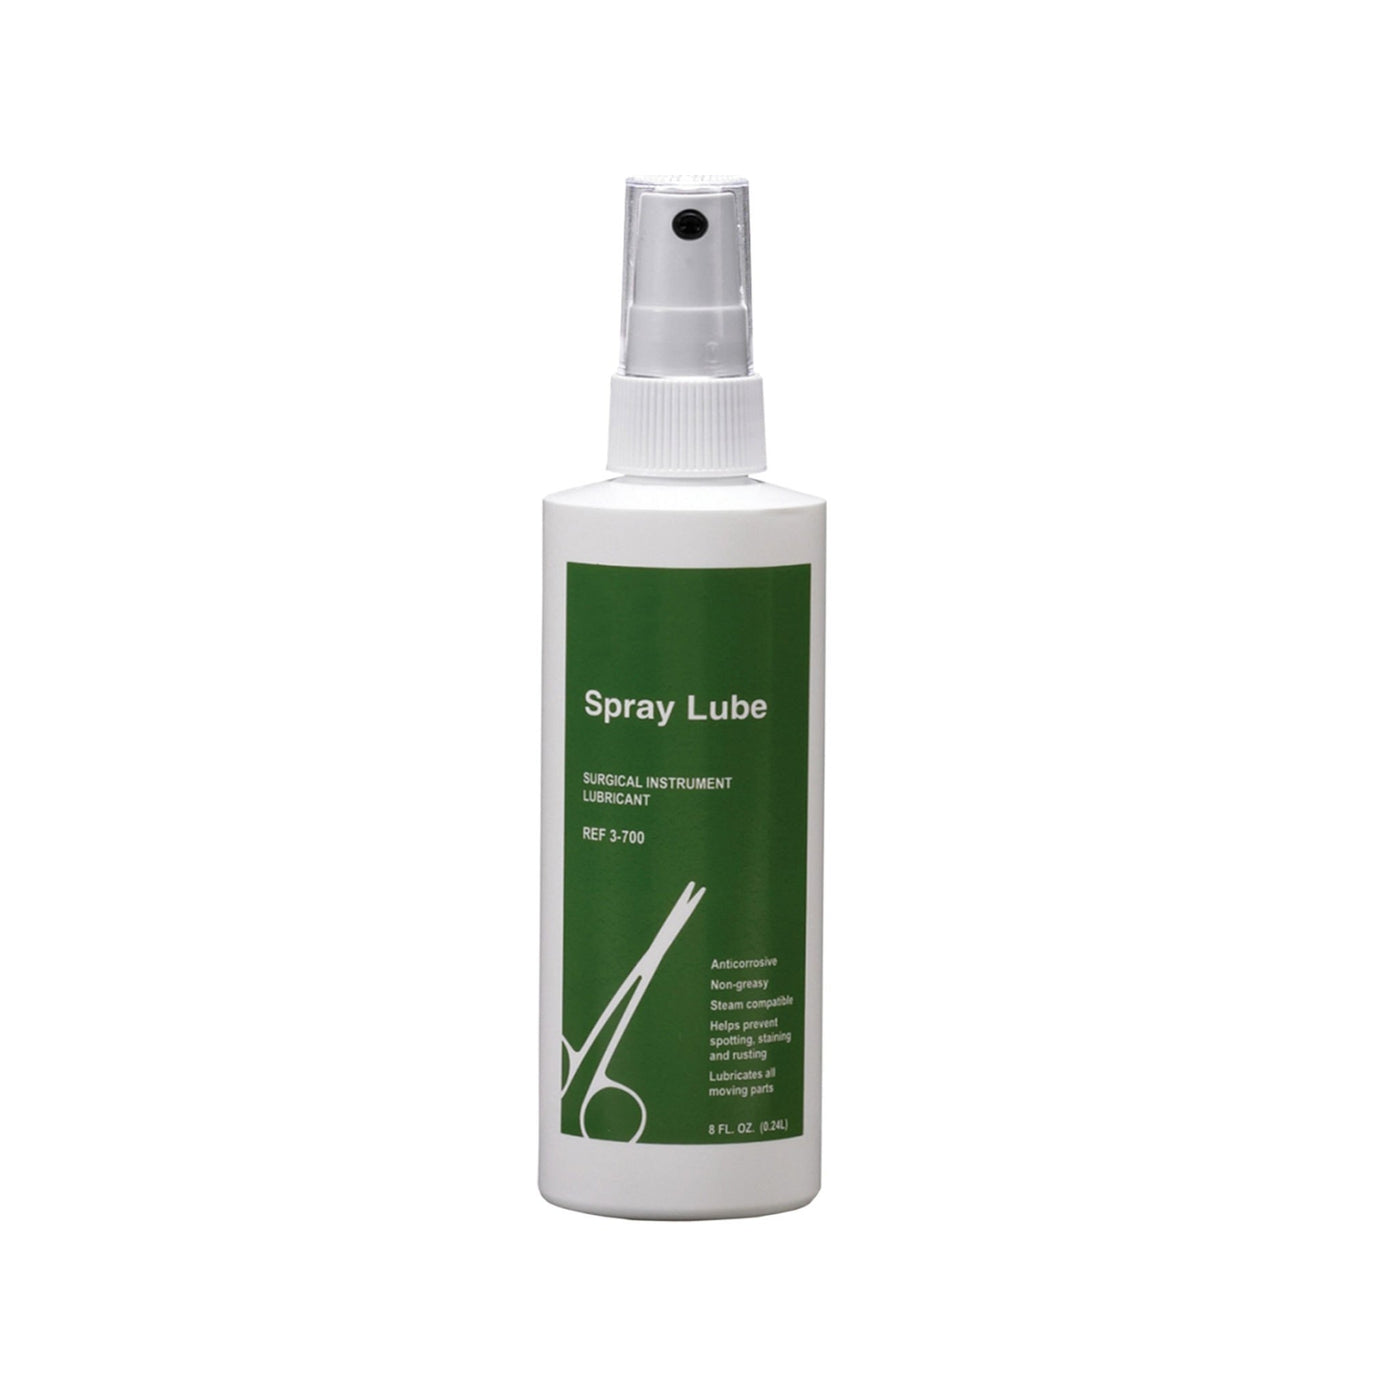 Spray Lube | Mortech Manufacturing Company Inc. Quality Stainless Steel ...